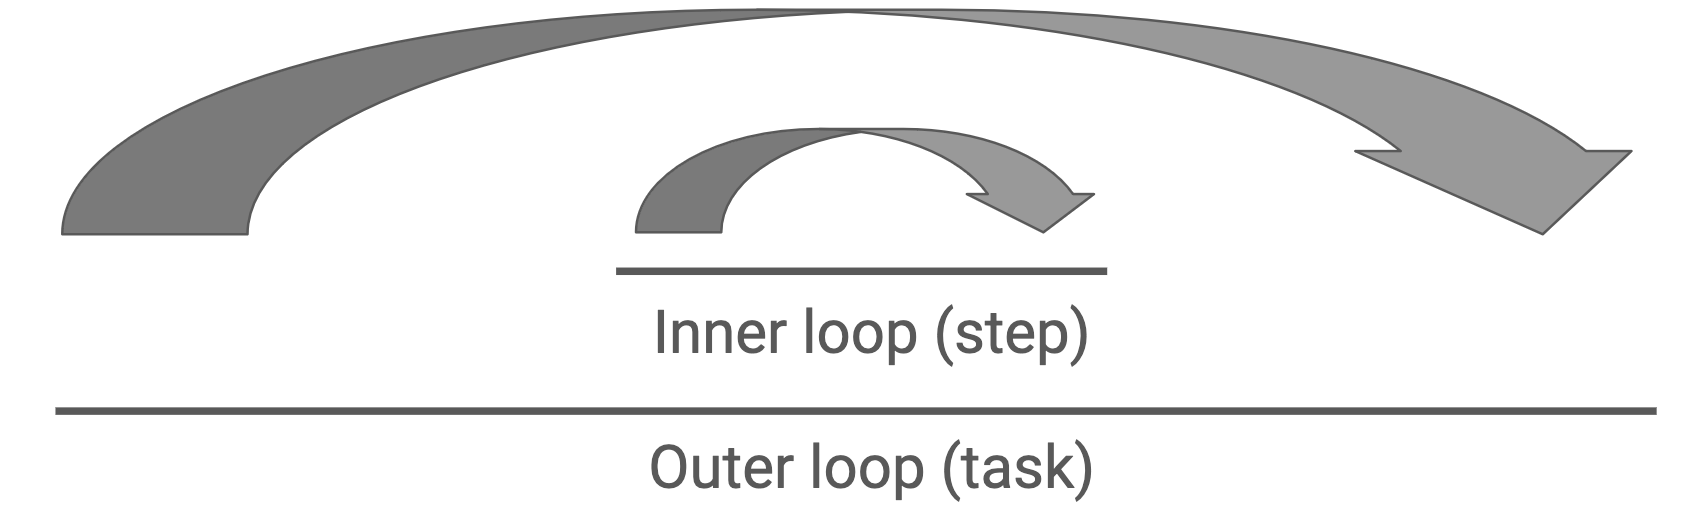 Inner and outer loops of intelligent tutoring systems